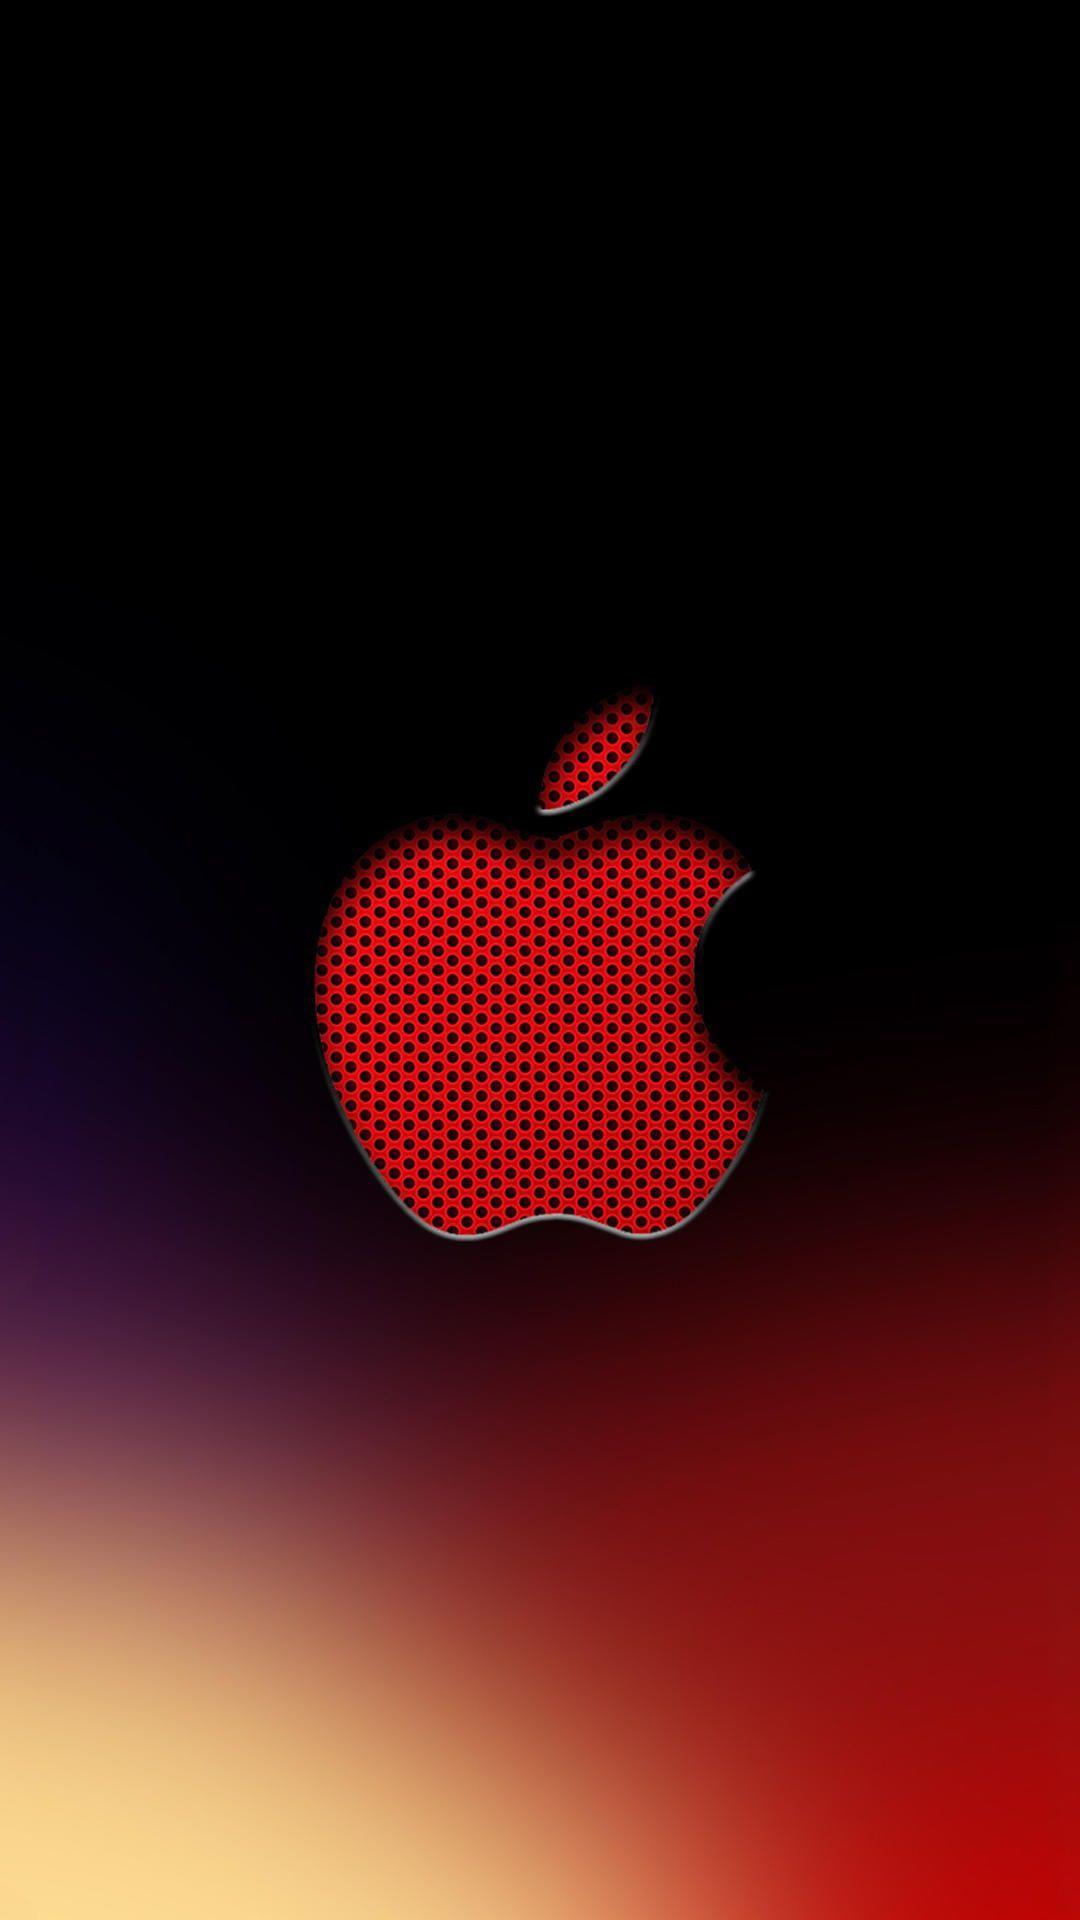 Red Apple Iphone Wallpapers Top Free Red Apple Iphone Backgrounds Wallpaperaccess